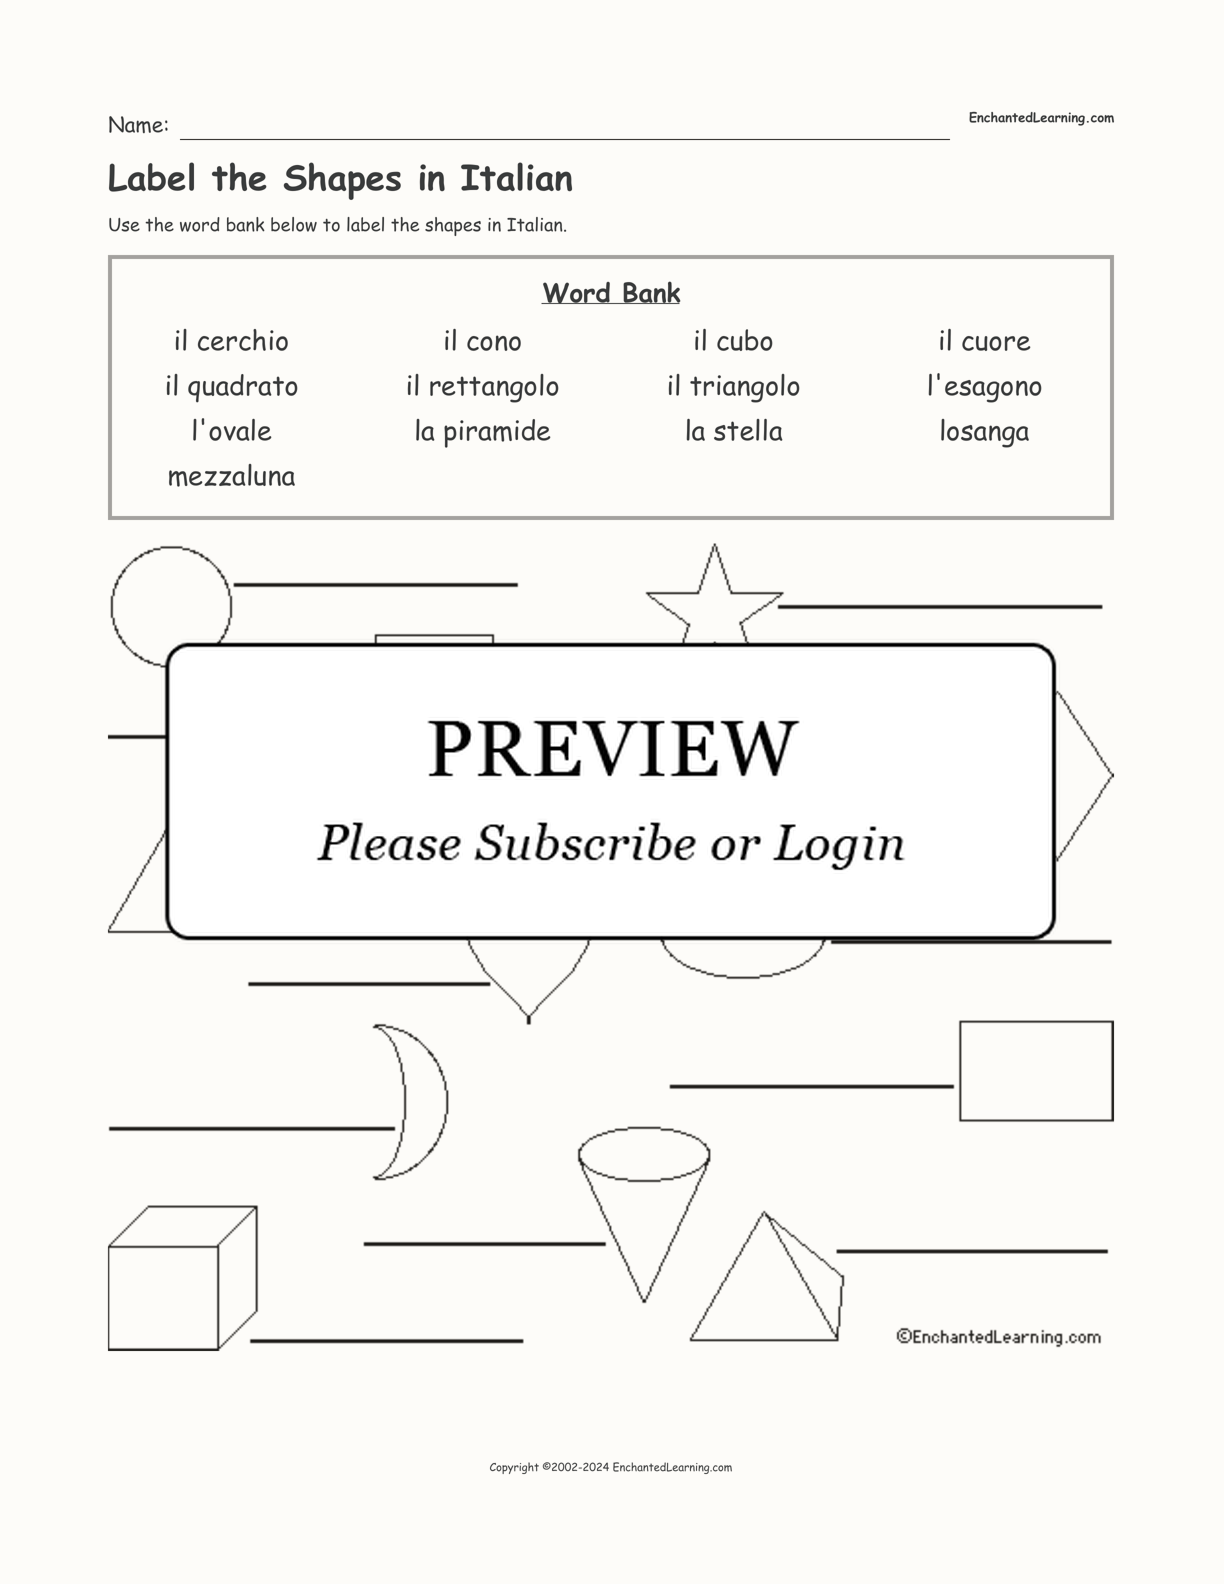 Label the Shapes in Italian interactive worksheet page 1